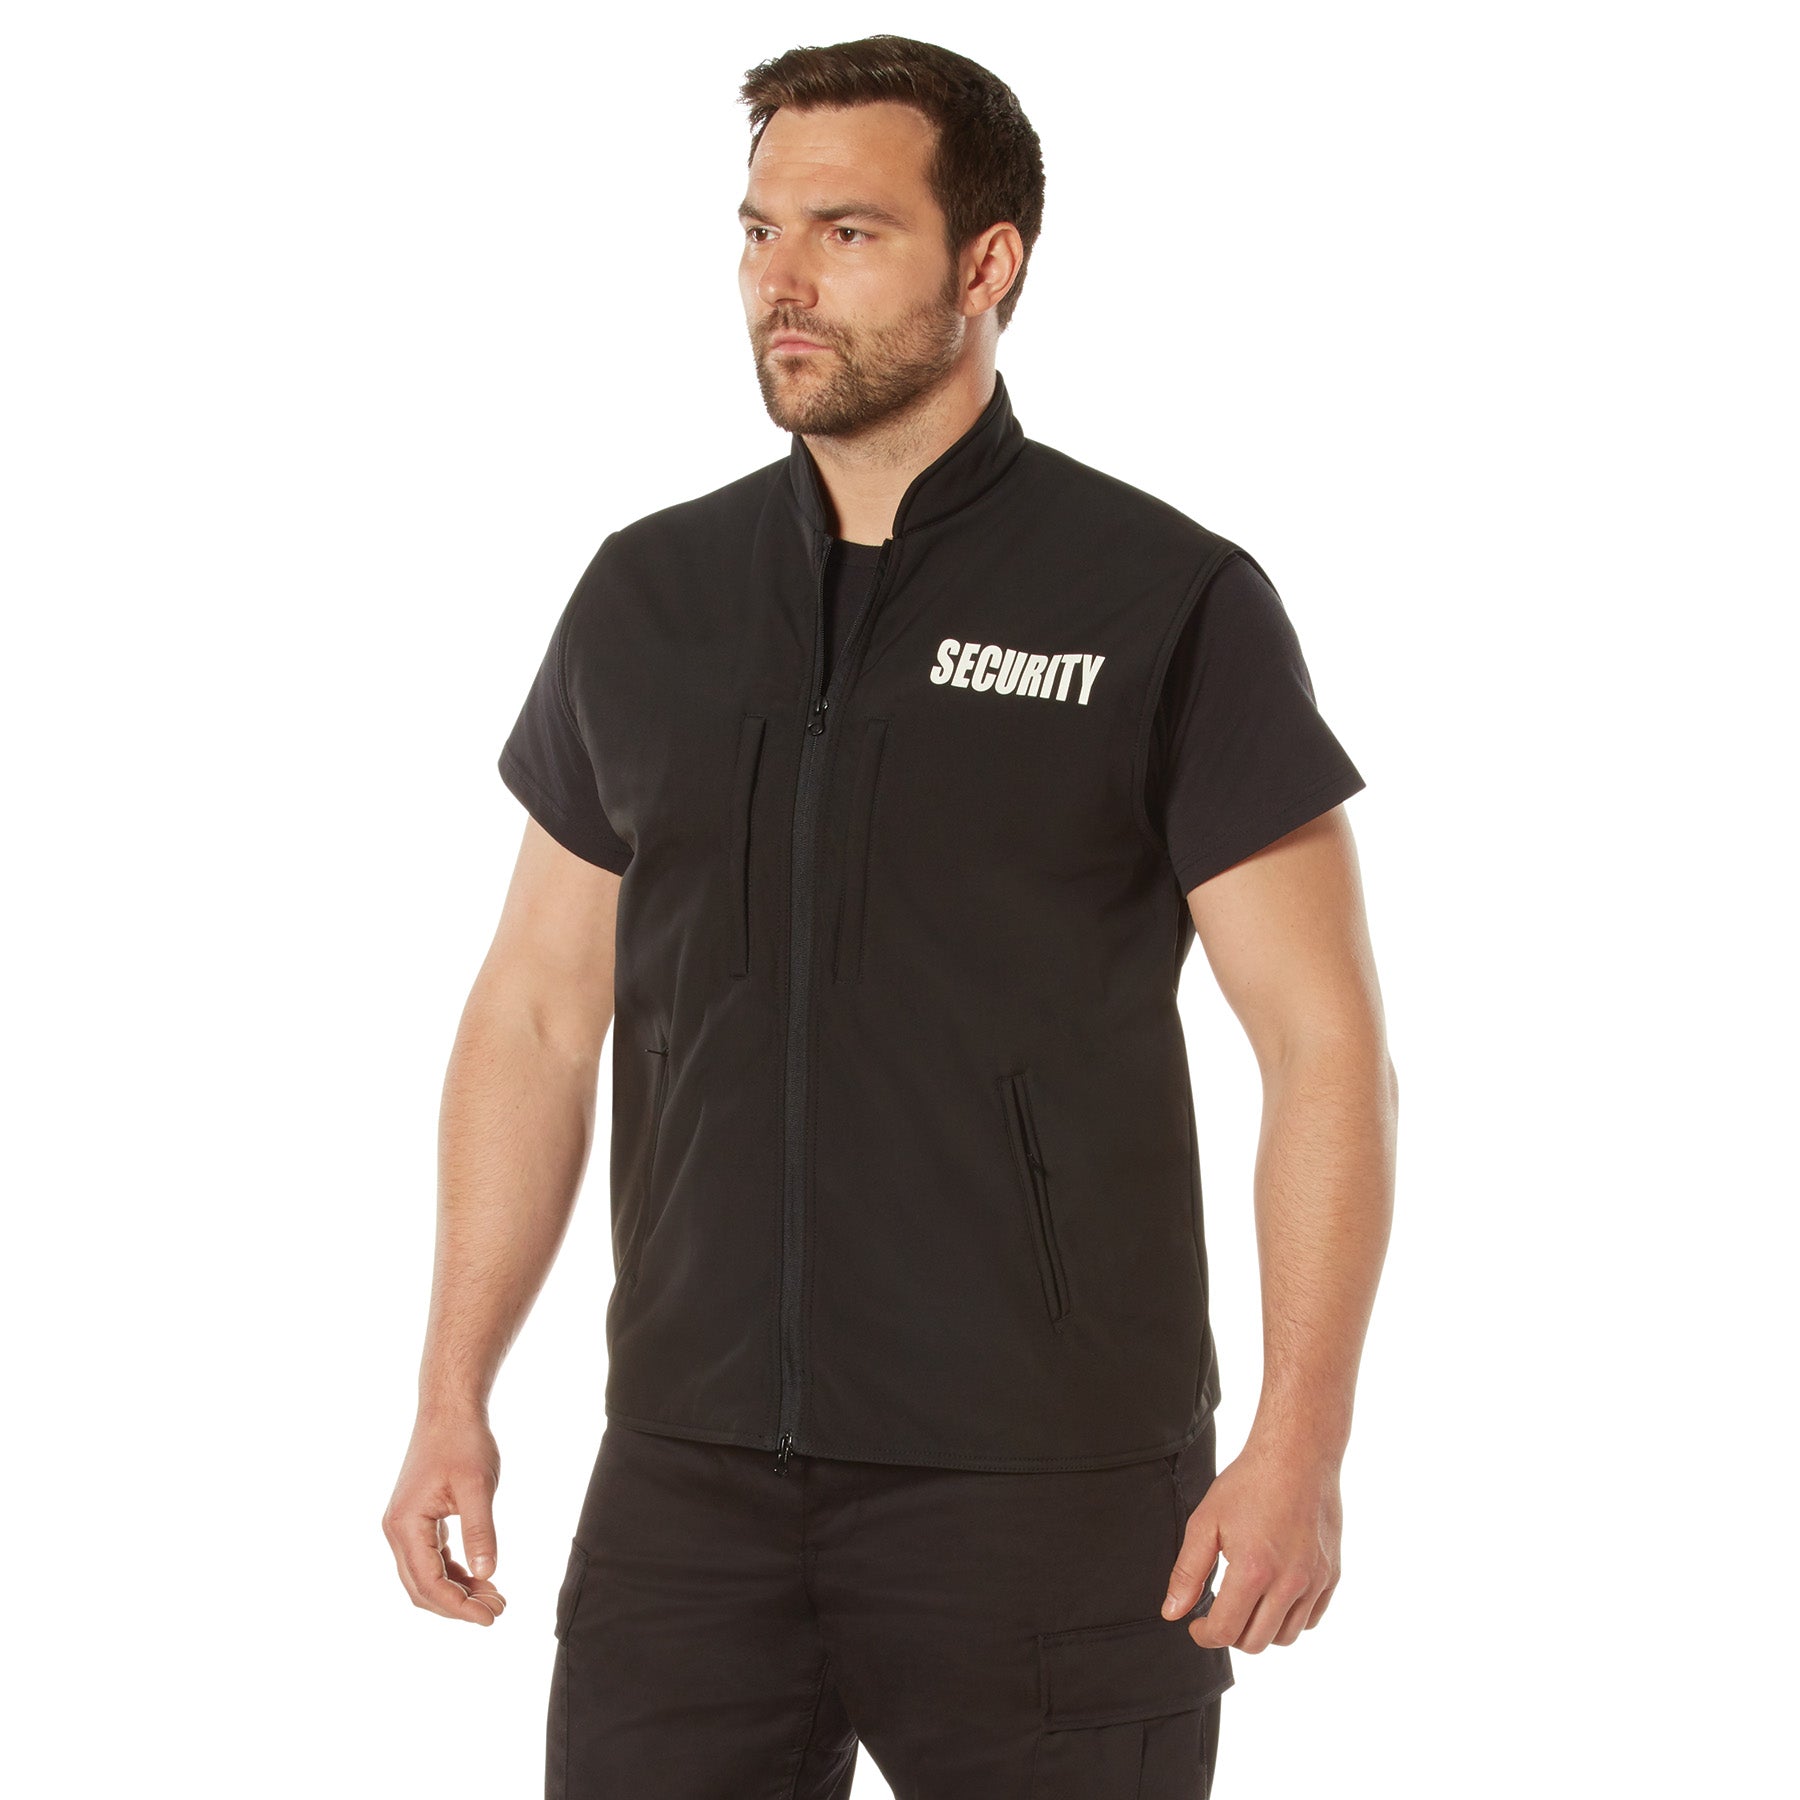 [Public Safety] Poly Security Concealed Carry Soft Shell Vests Security White - Black